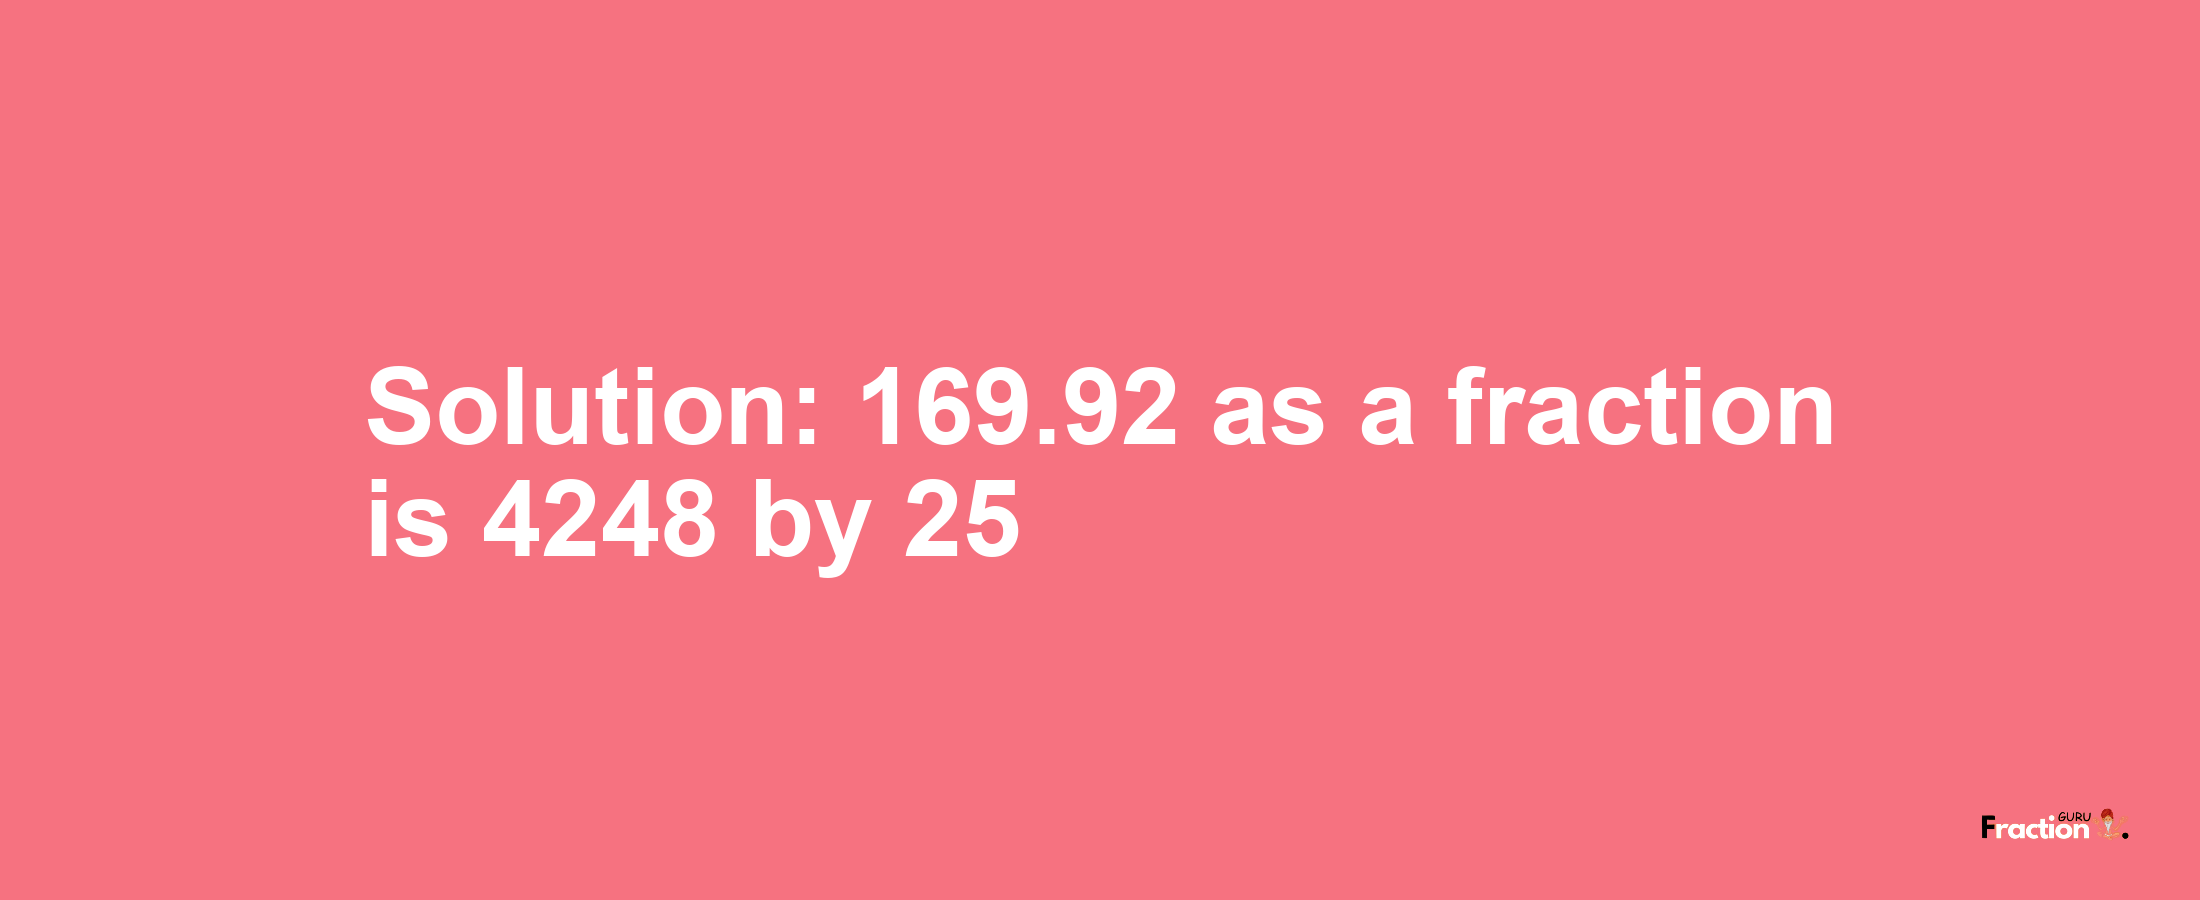 Solution:169.92 as a fraction is 4248/25